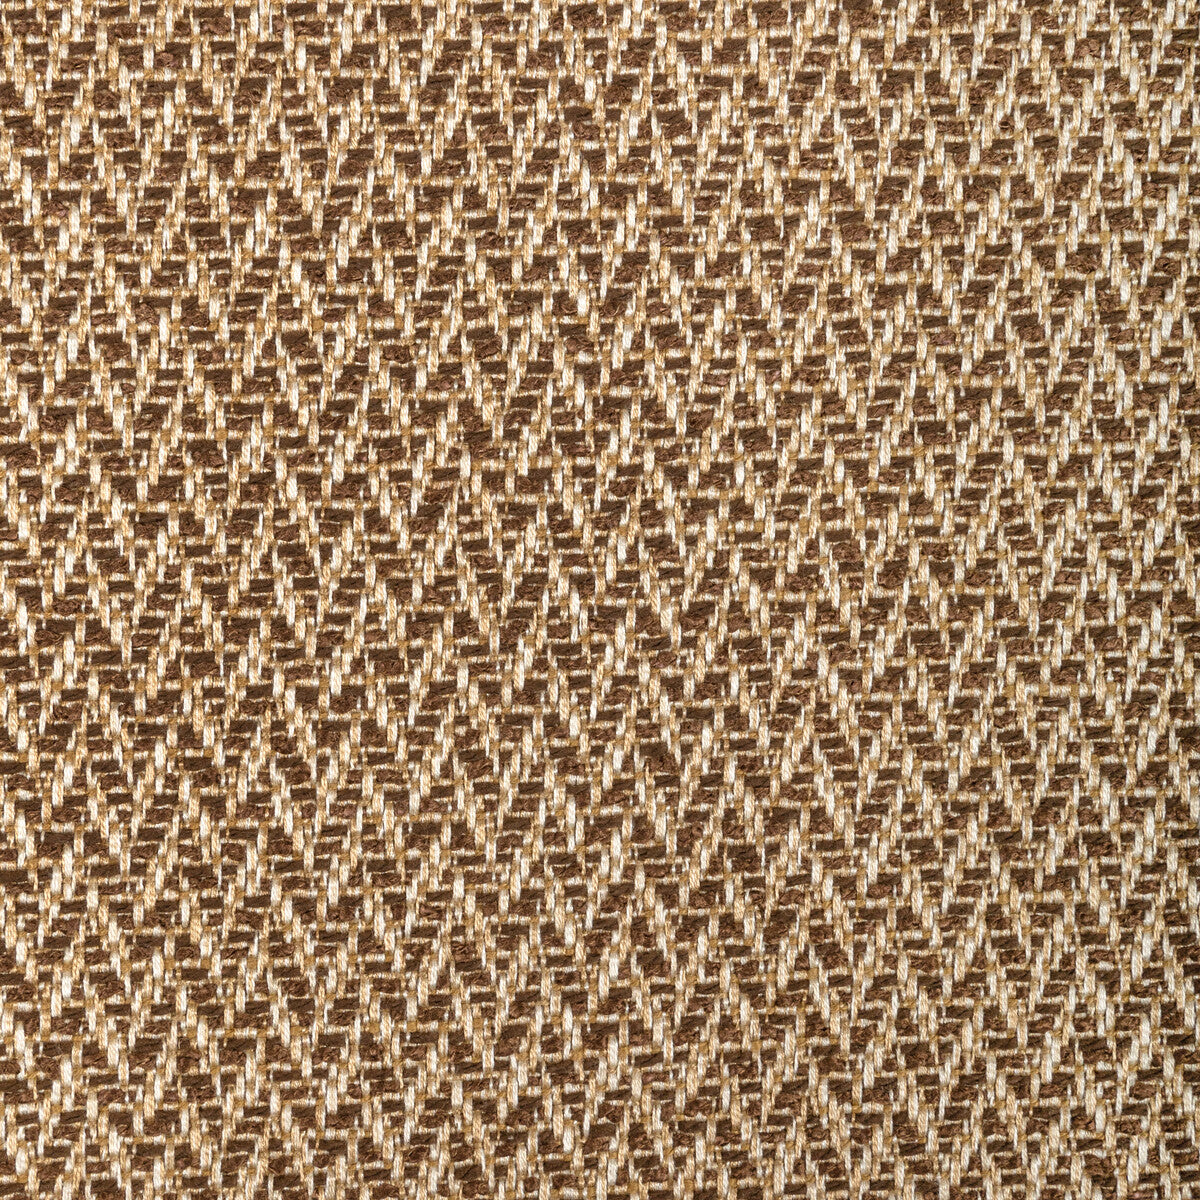 Kravet Design fabric in 36418-6 color - pattern 36418.6.0 - by Kravet Design in the Performance Crypton Home collection